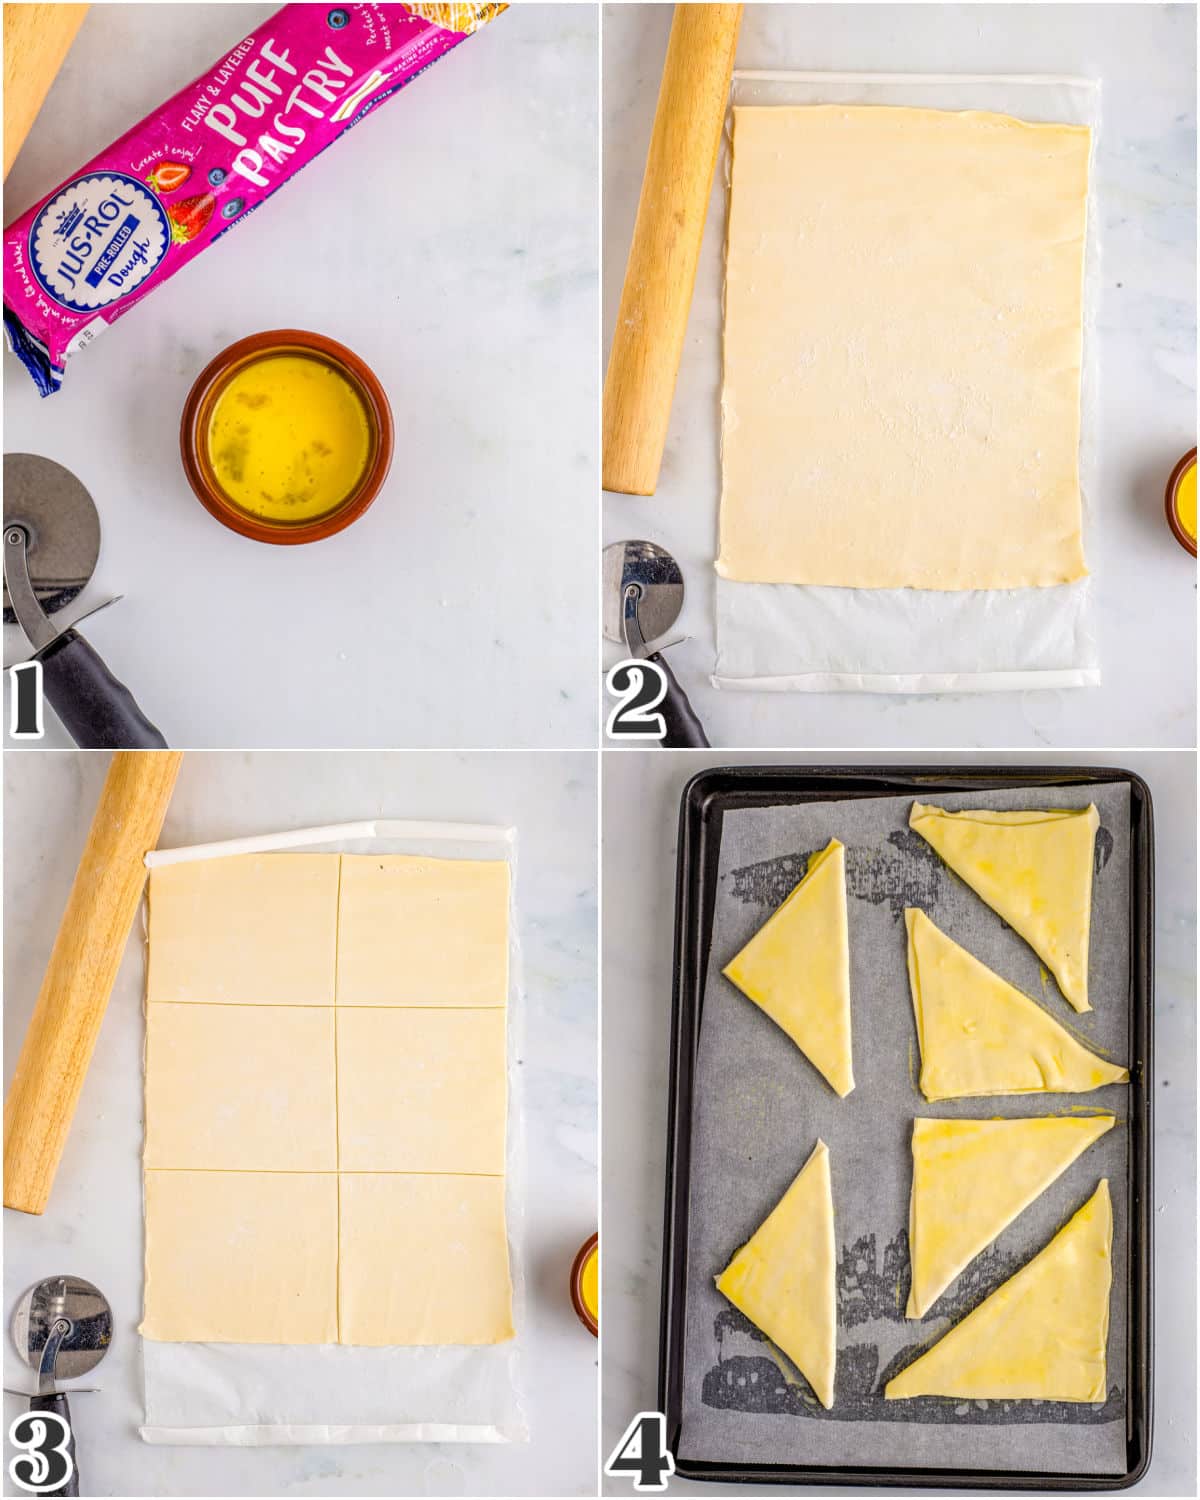 A picture collage showing how to make croissant from puff pastry.